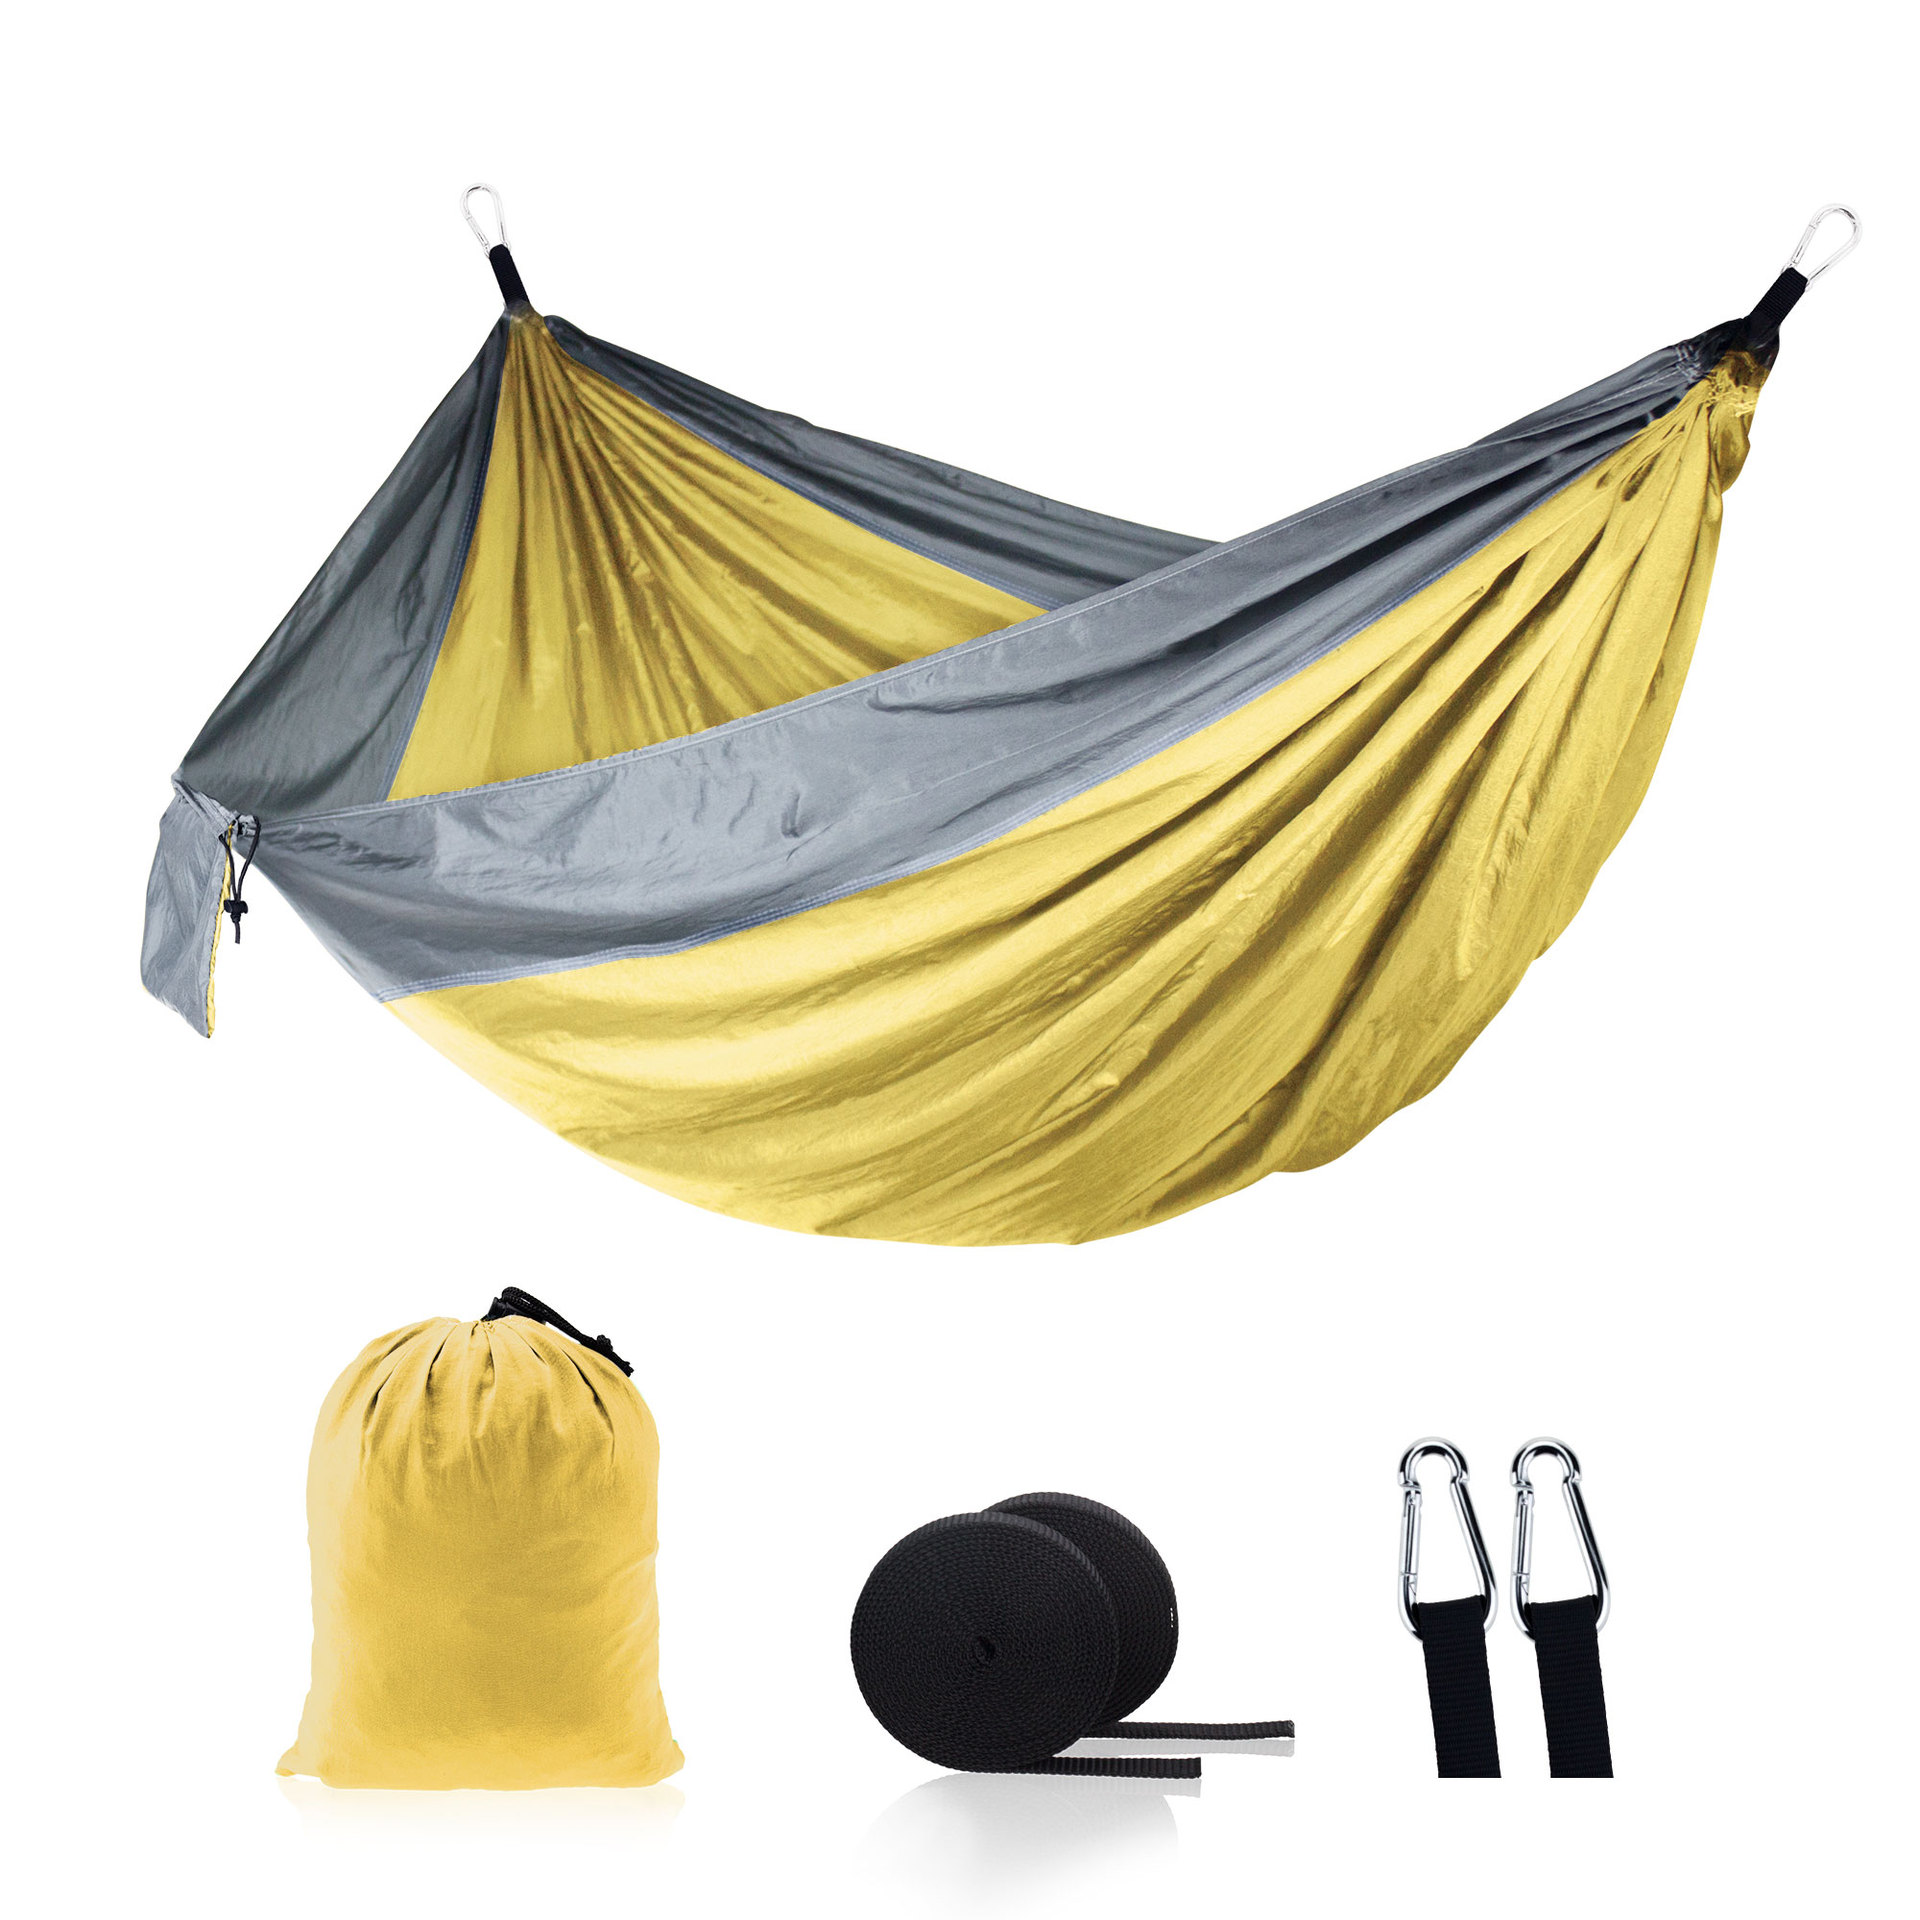 Customized portable folding outdoor Hammock with Carry Bag for Camping